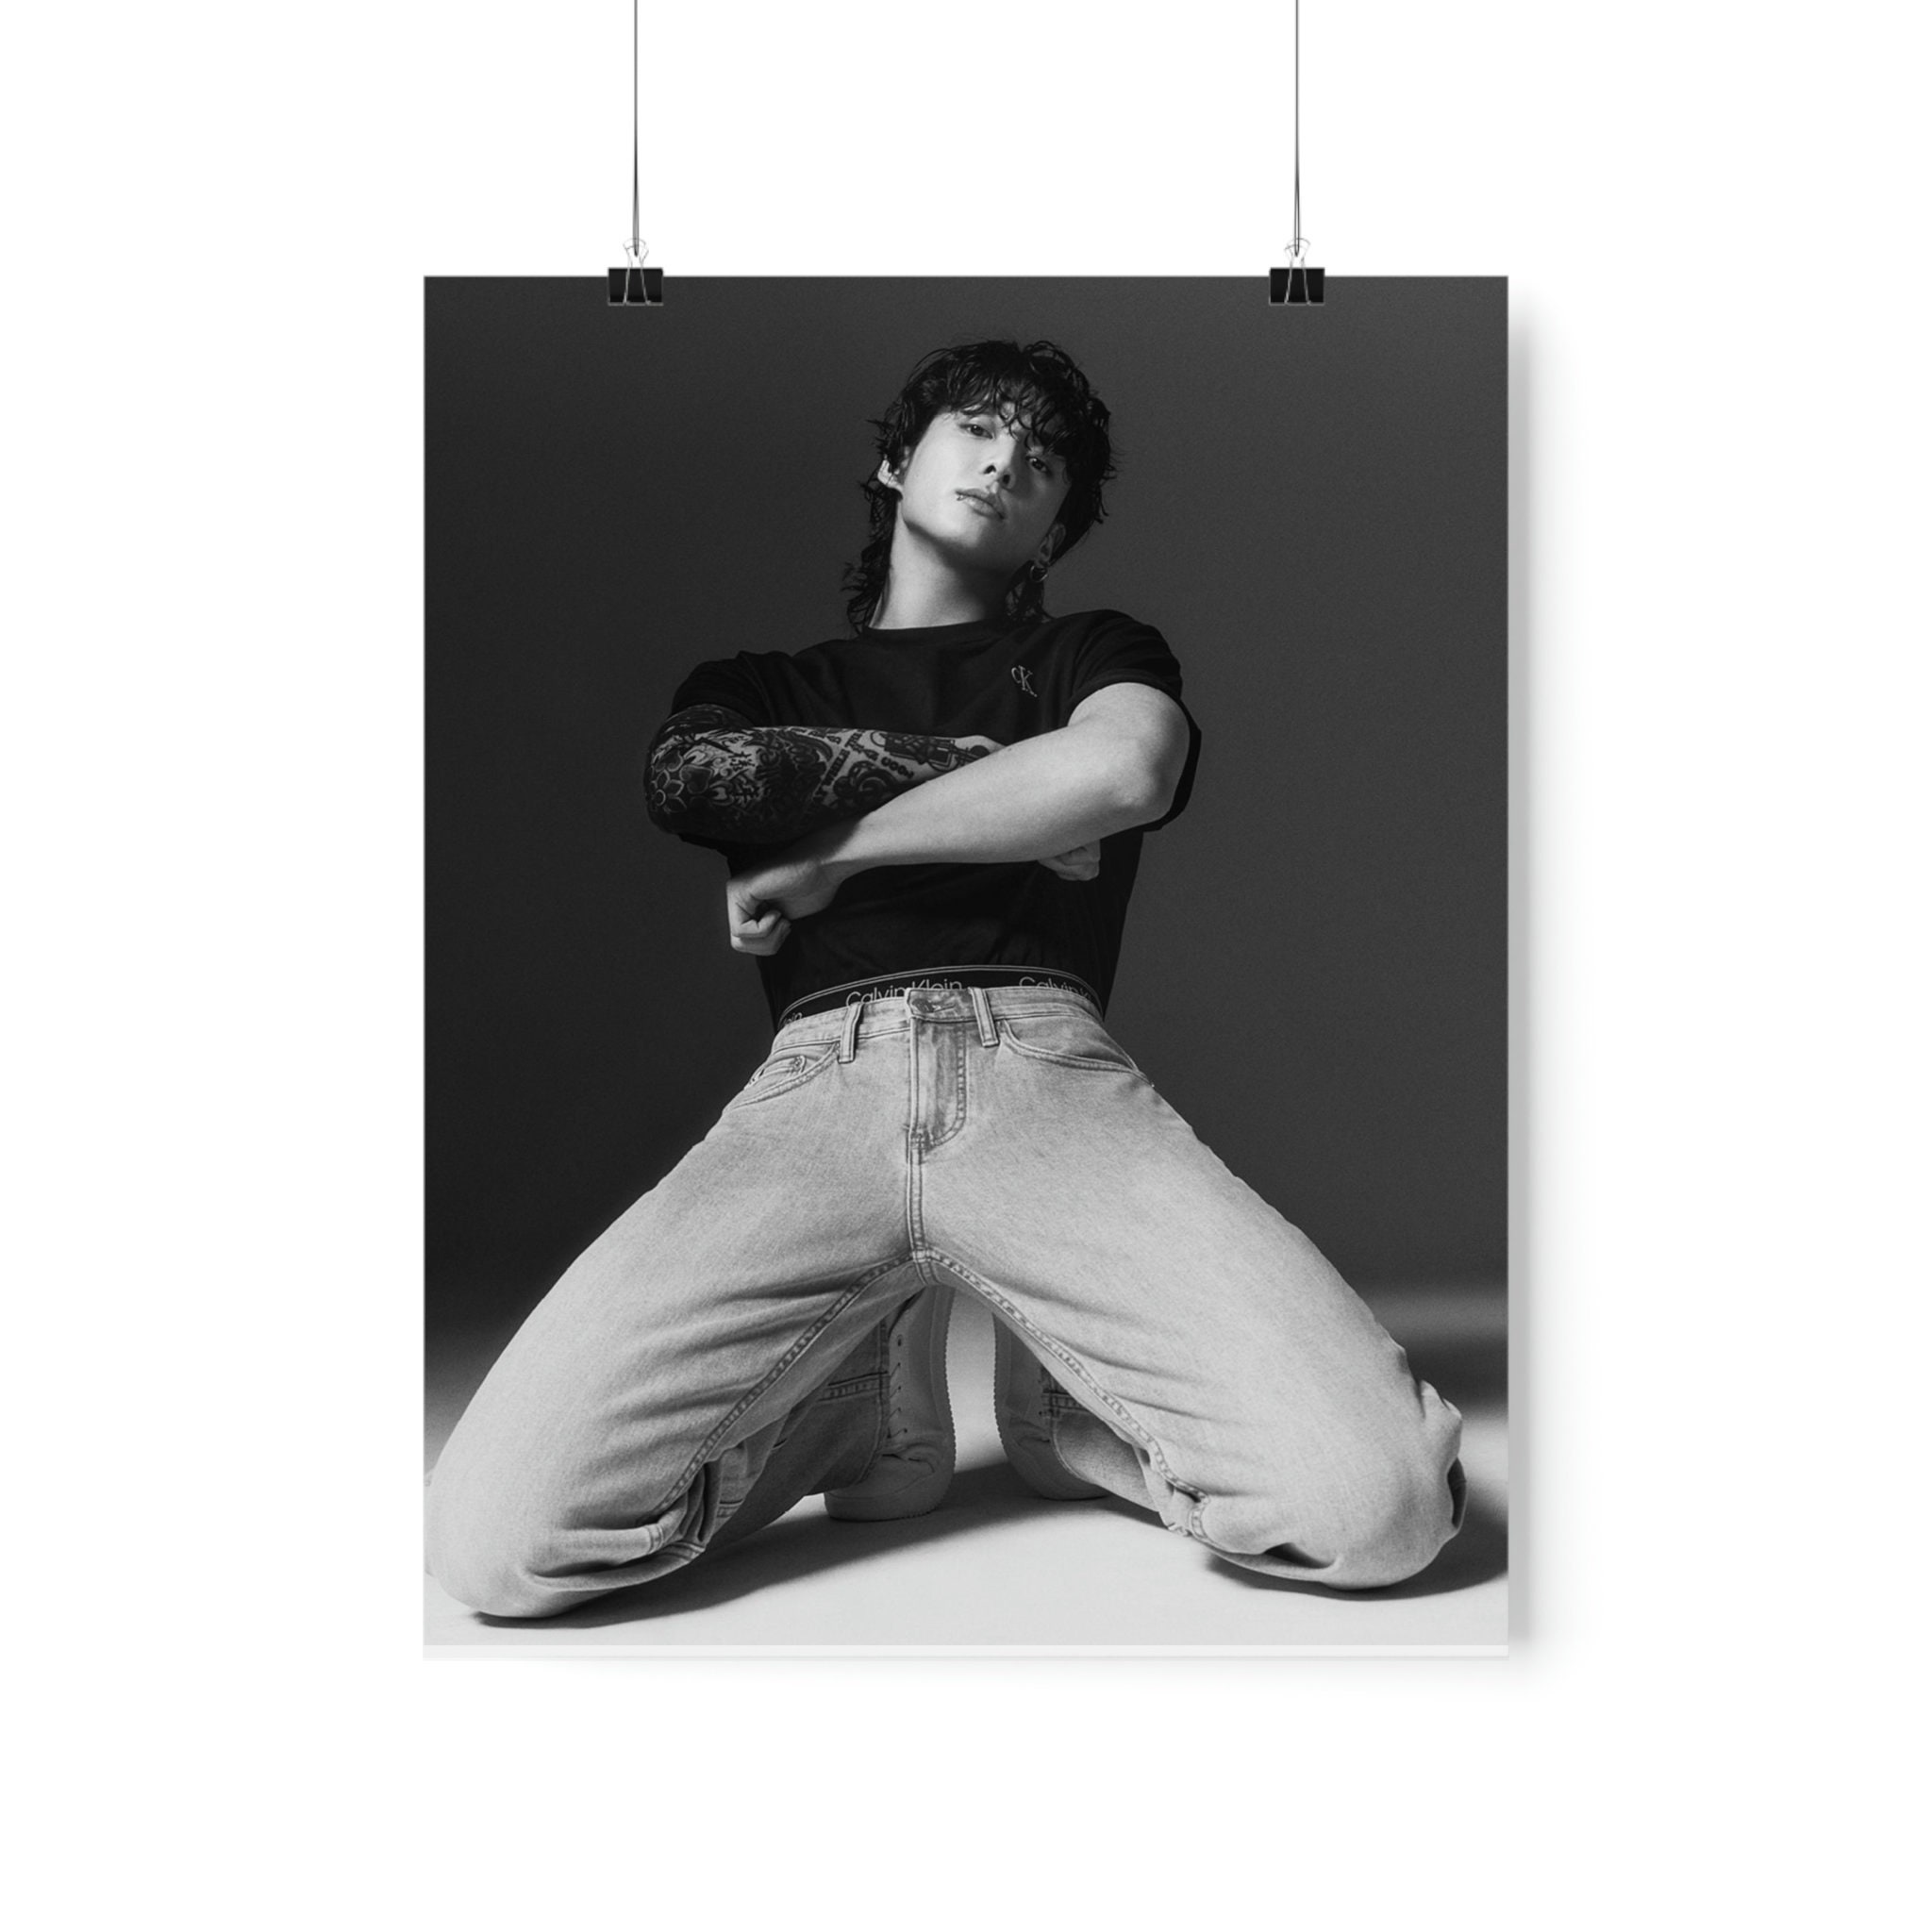 Bts Jungkook CALVIN KLEIN Posters sold by Chris Chen